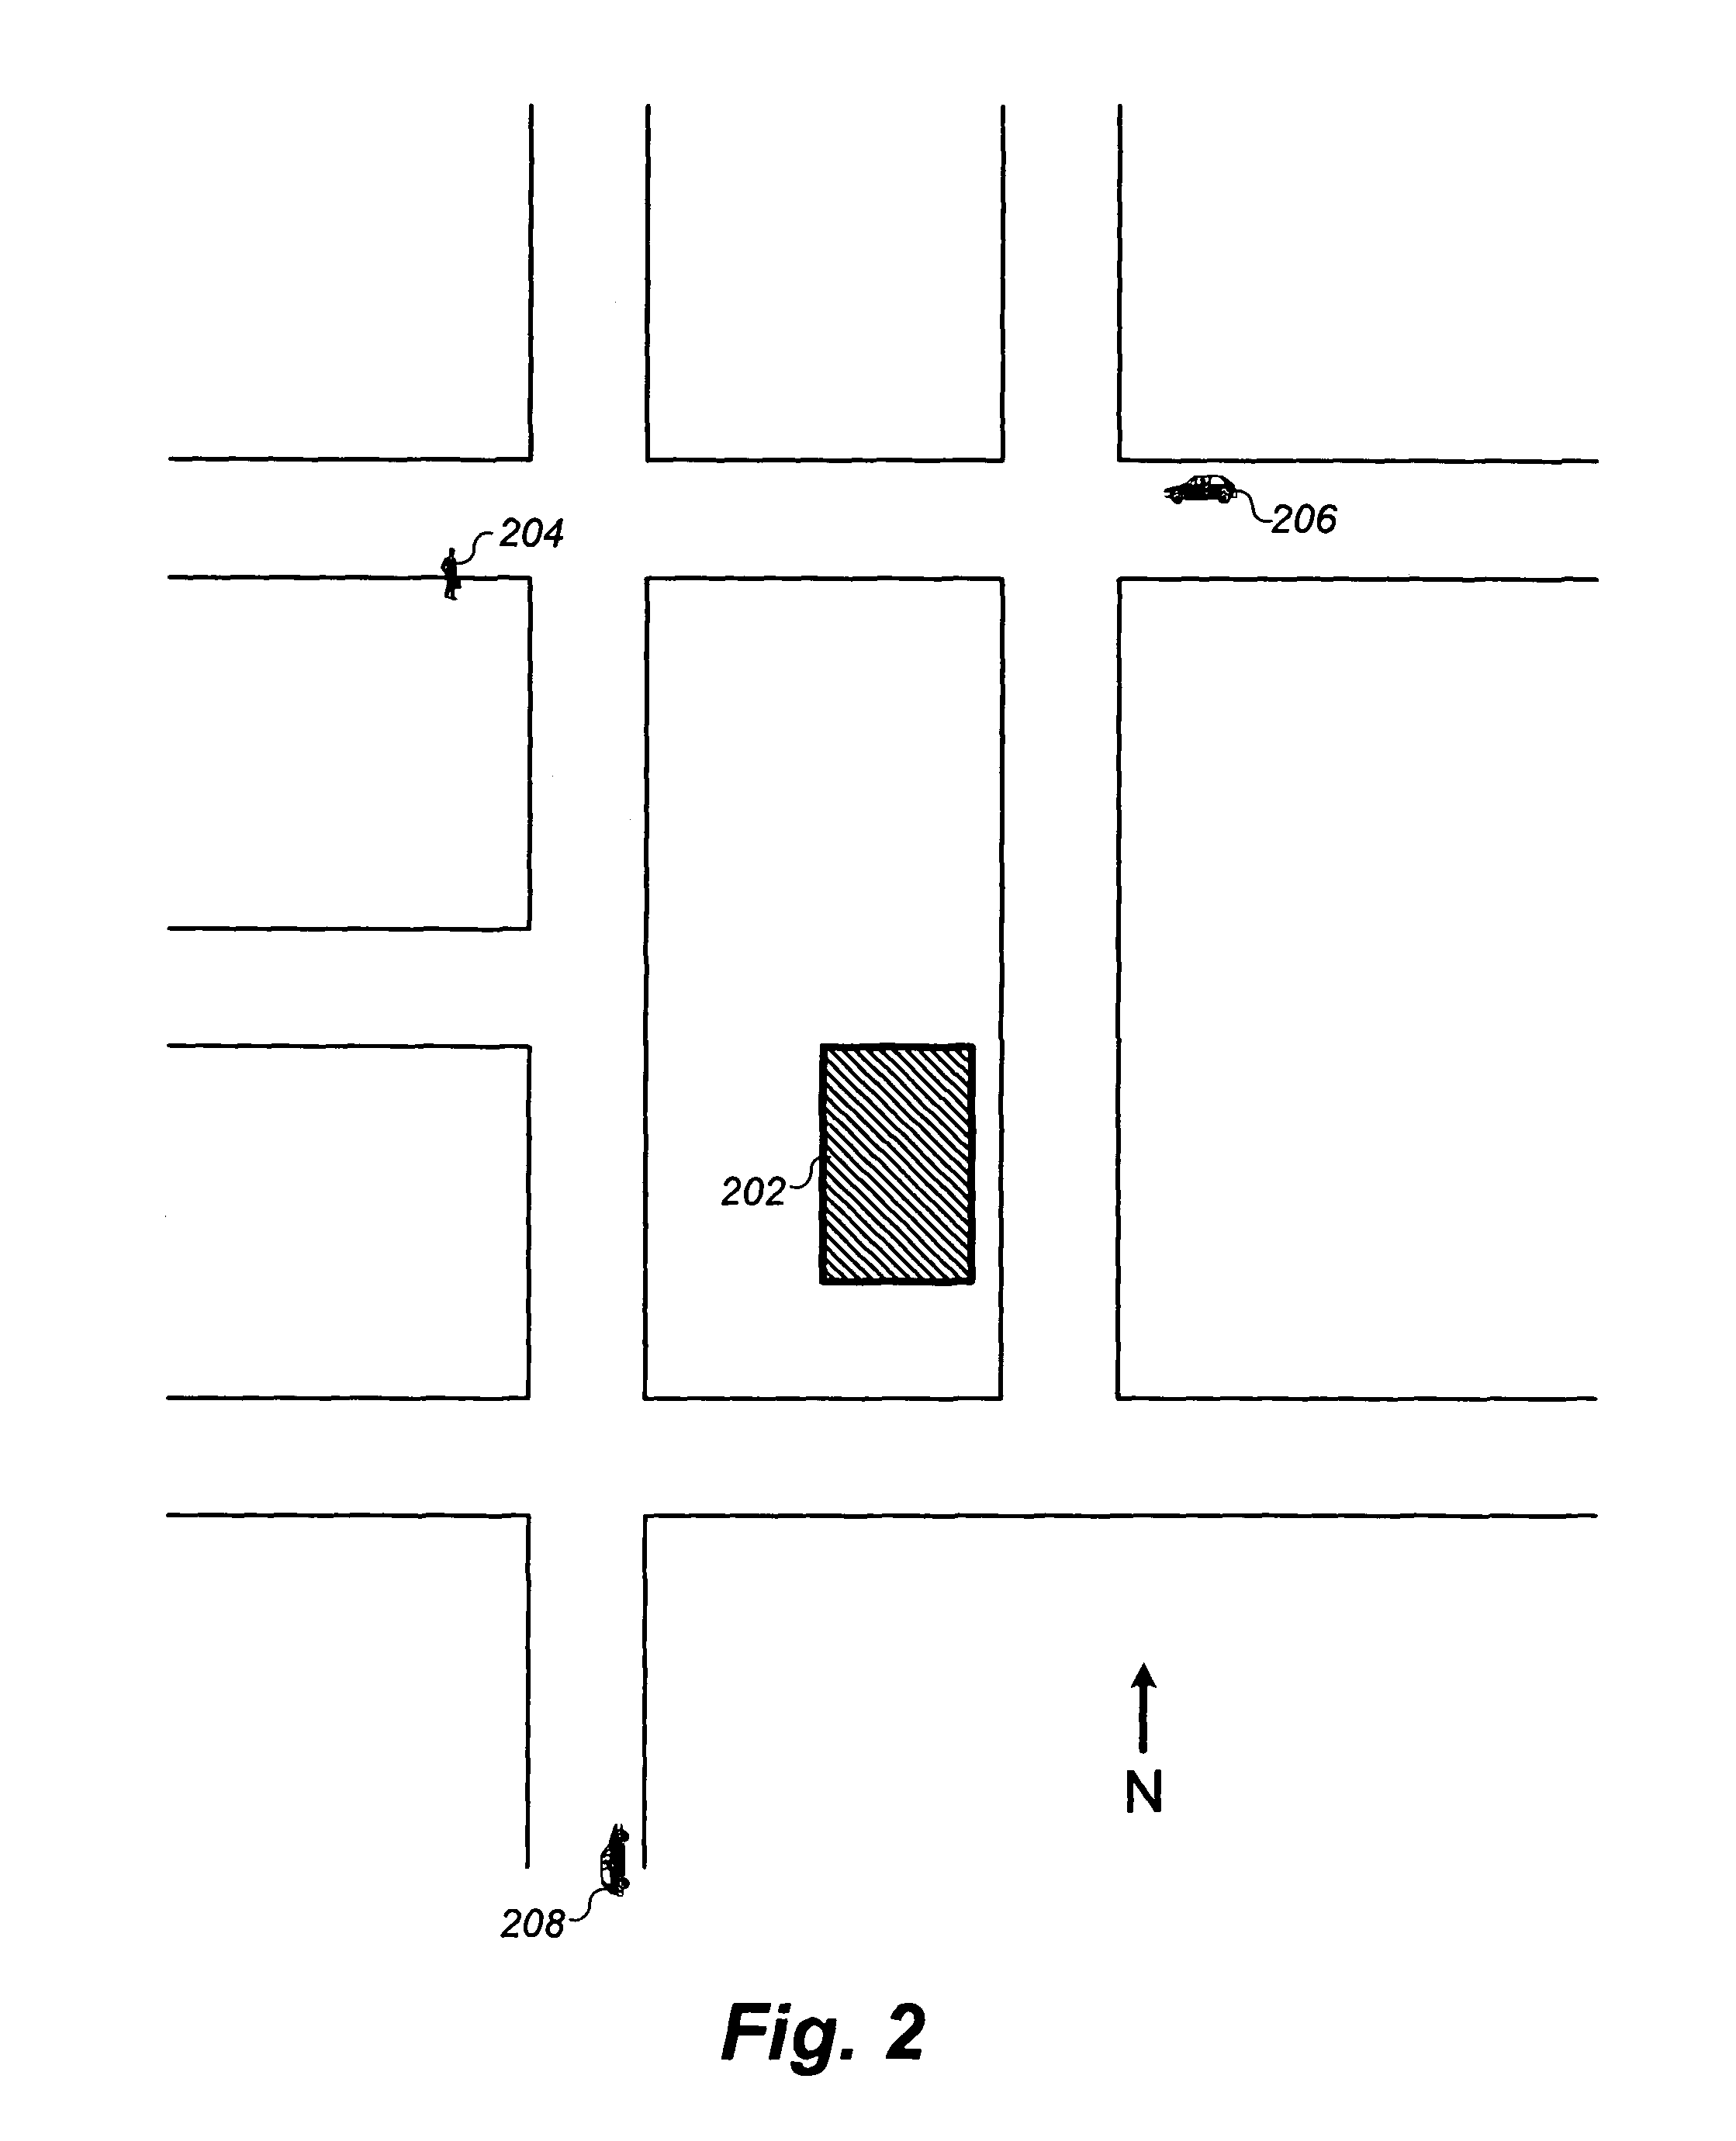 System and method for anonymous location based services